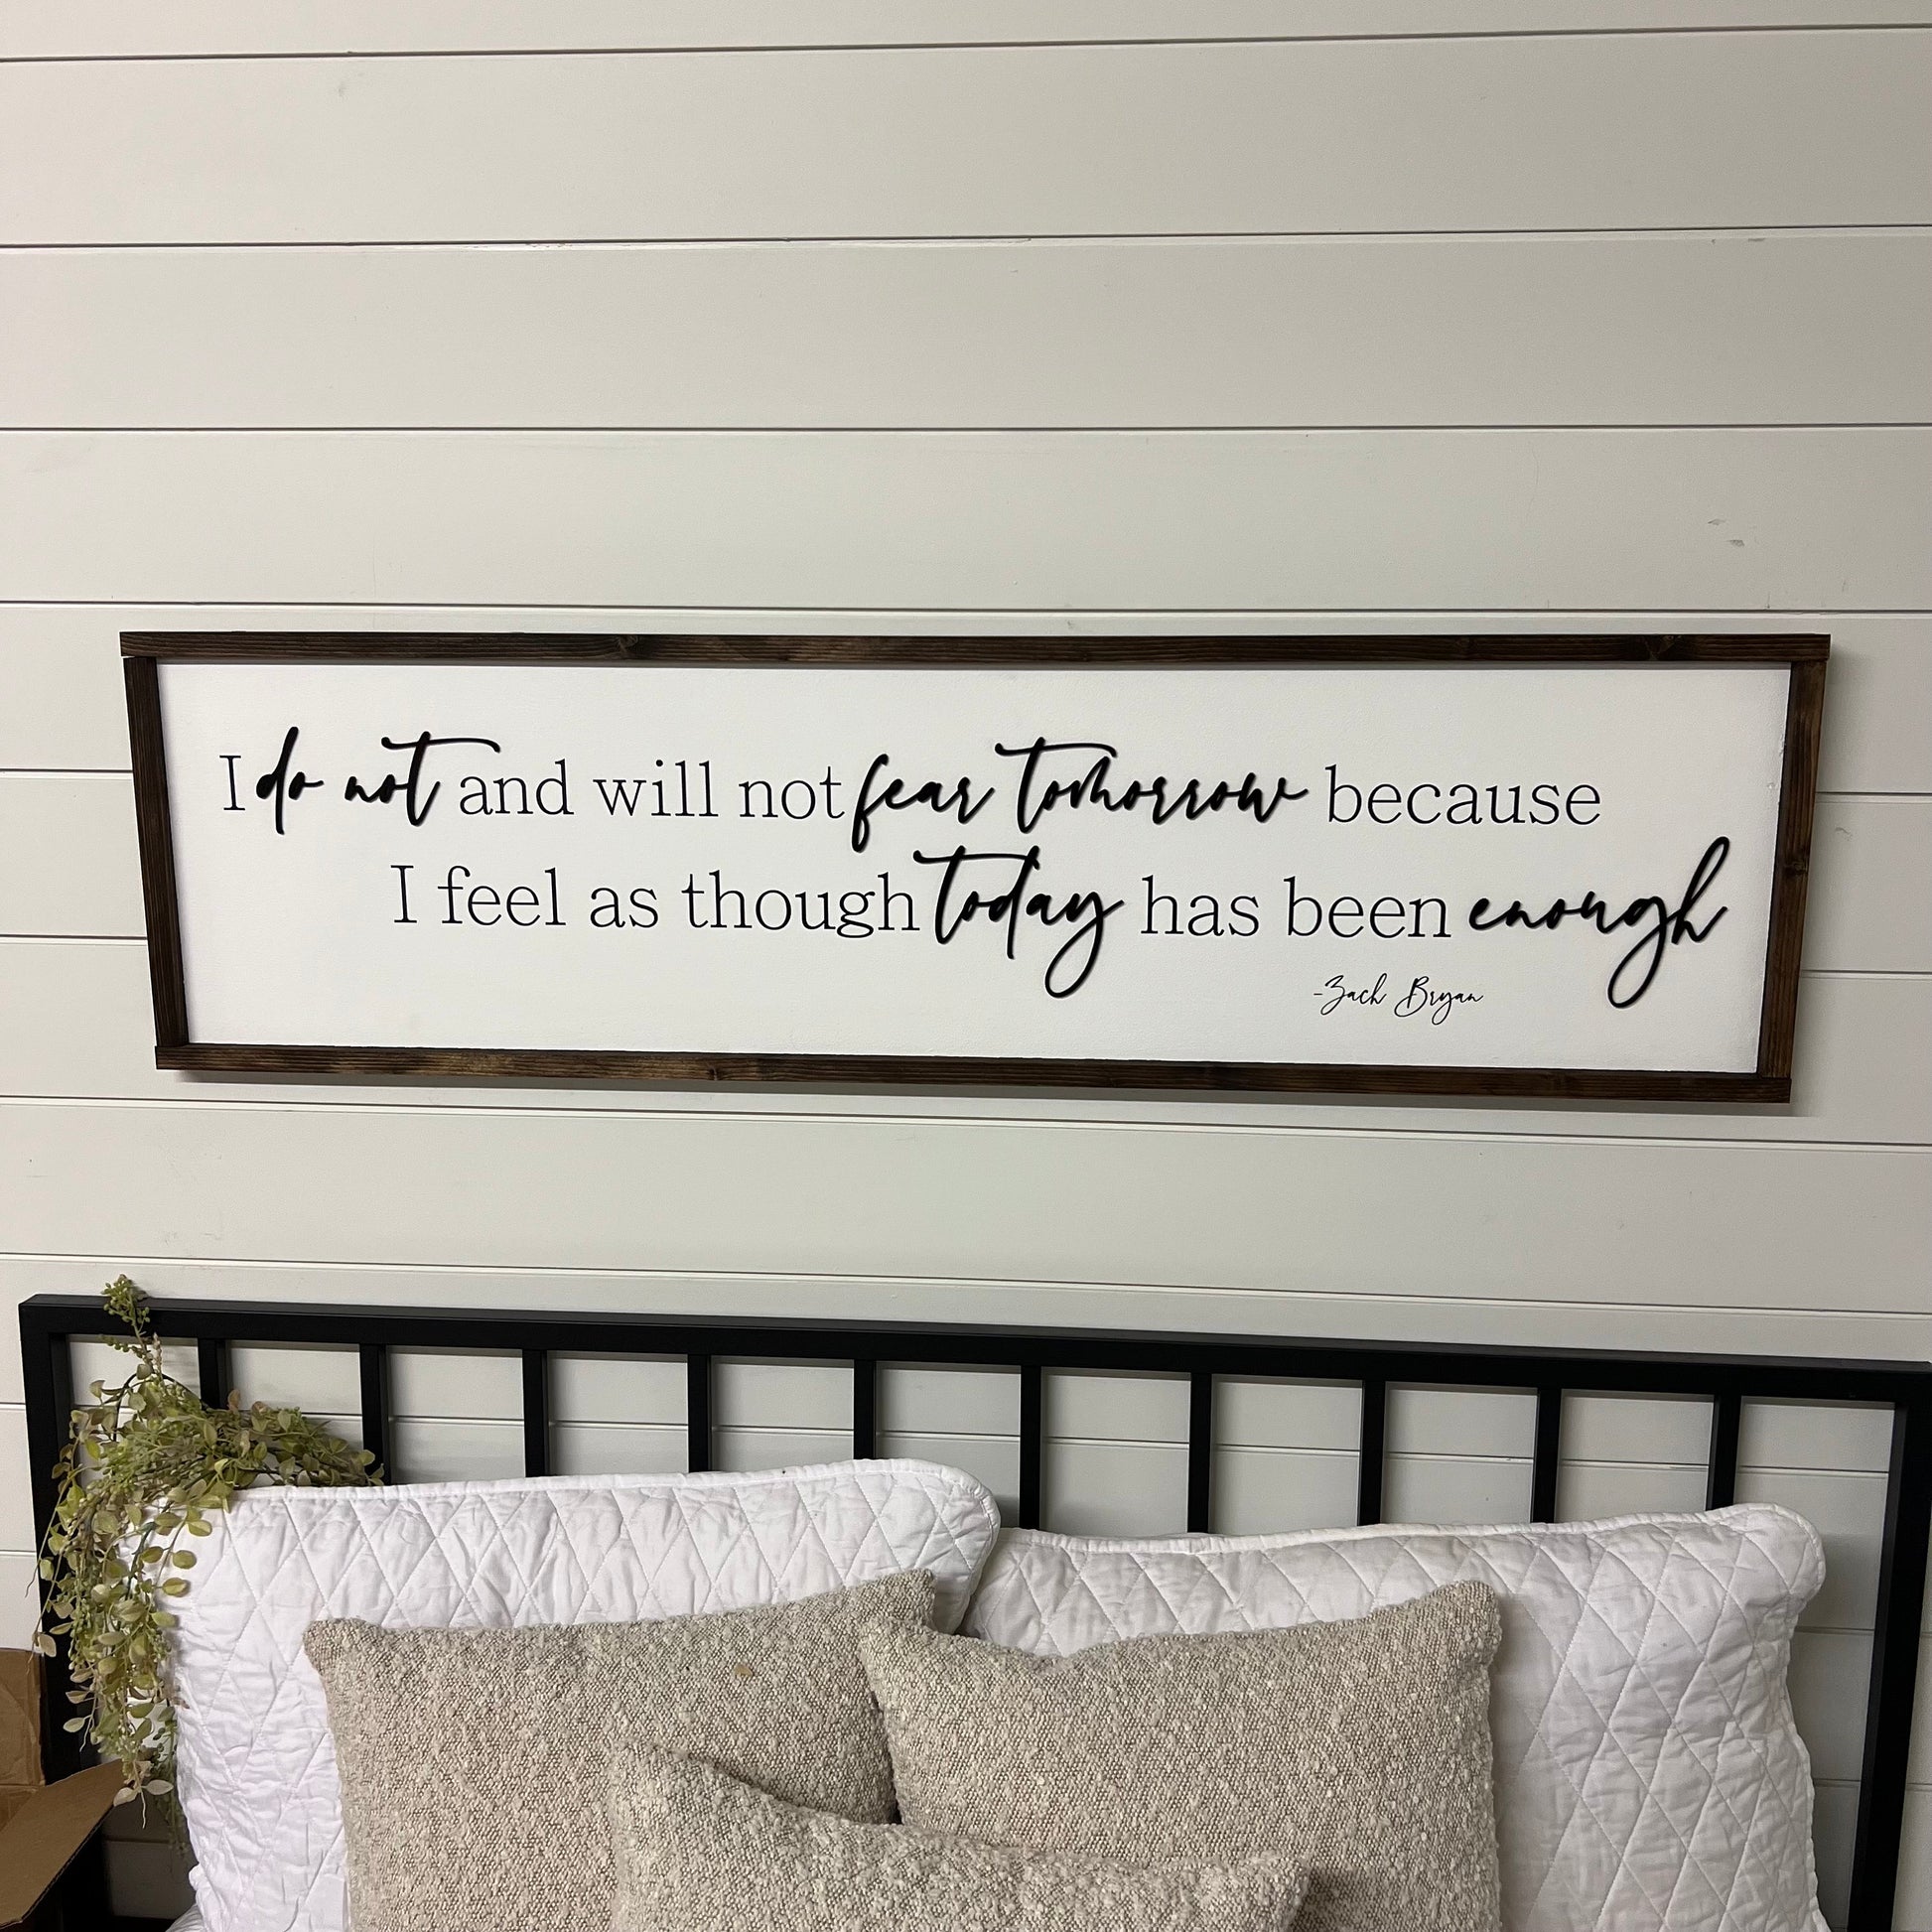 do not and will not fear tomorrow - above over the bed couch sign - zach bryan - master bedroom wall art [FREE SHIPPING!]